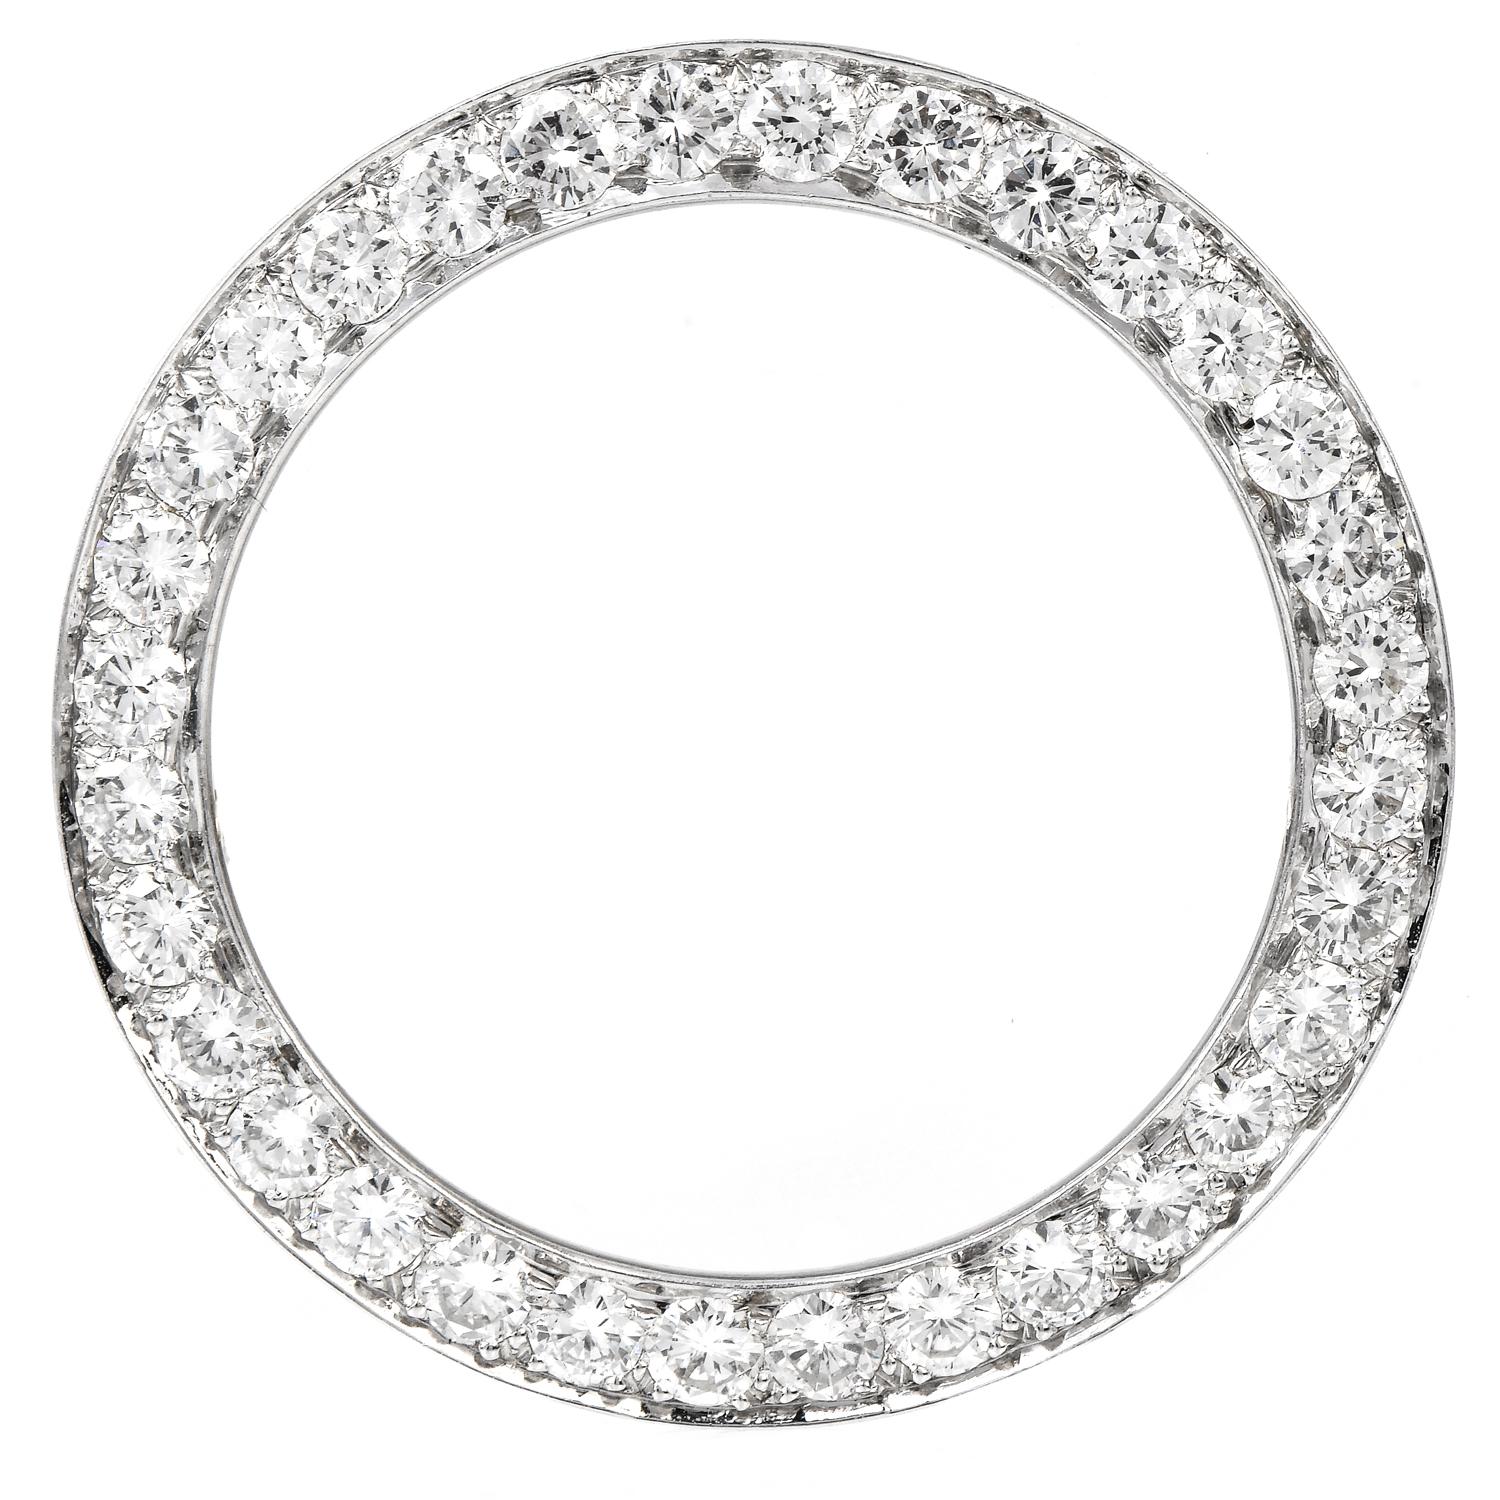 Dazzle with this vintage 1960's diamond & platinum brooch, wreath inspired with a circular shape.

Crafted in solid platinum, composed of (30) round-cut, pave sets, Diamonds weighing approximately 2.80 carats (F-G color and VS1 clarity)

The